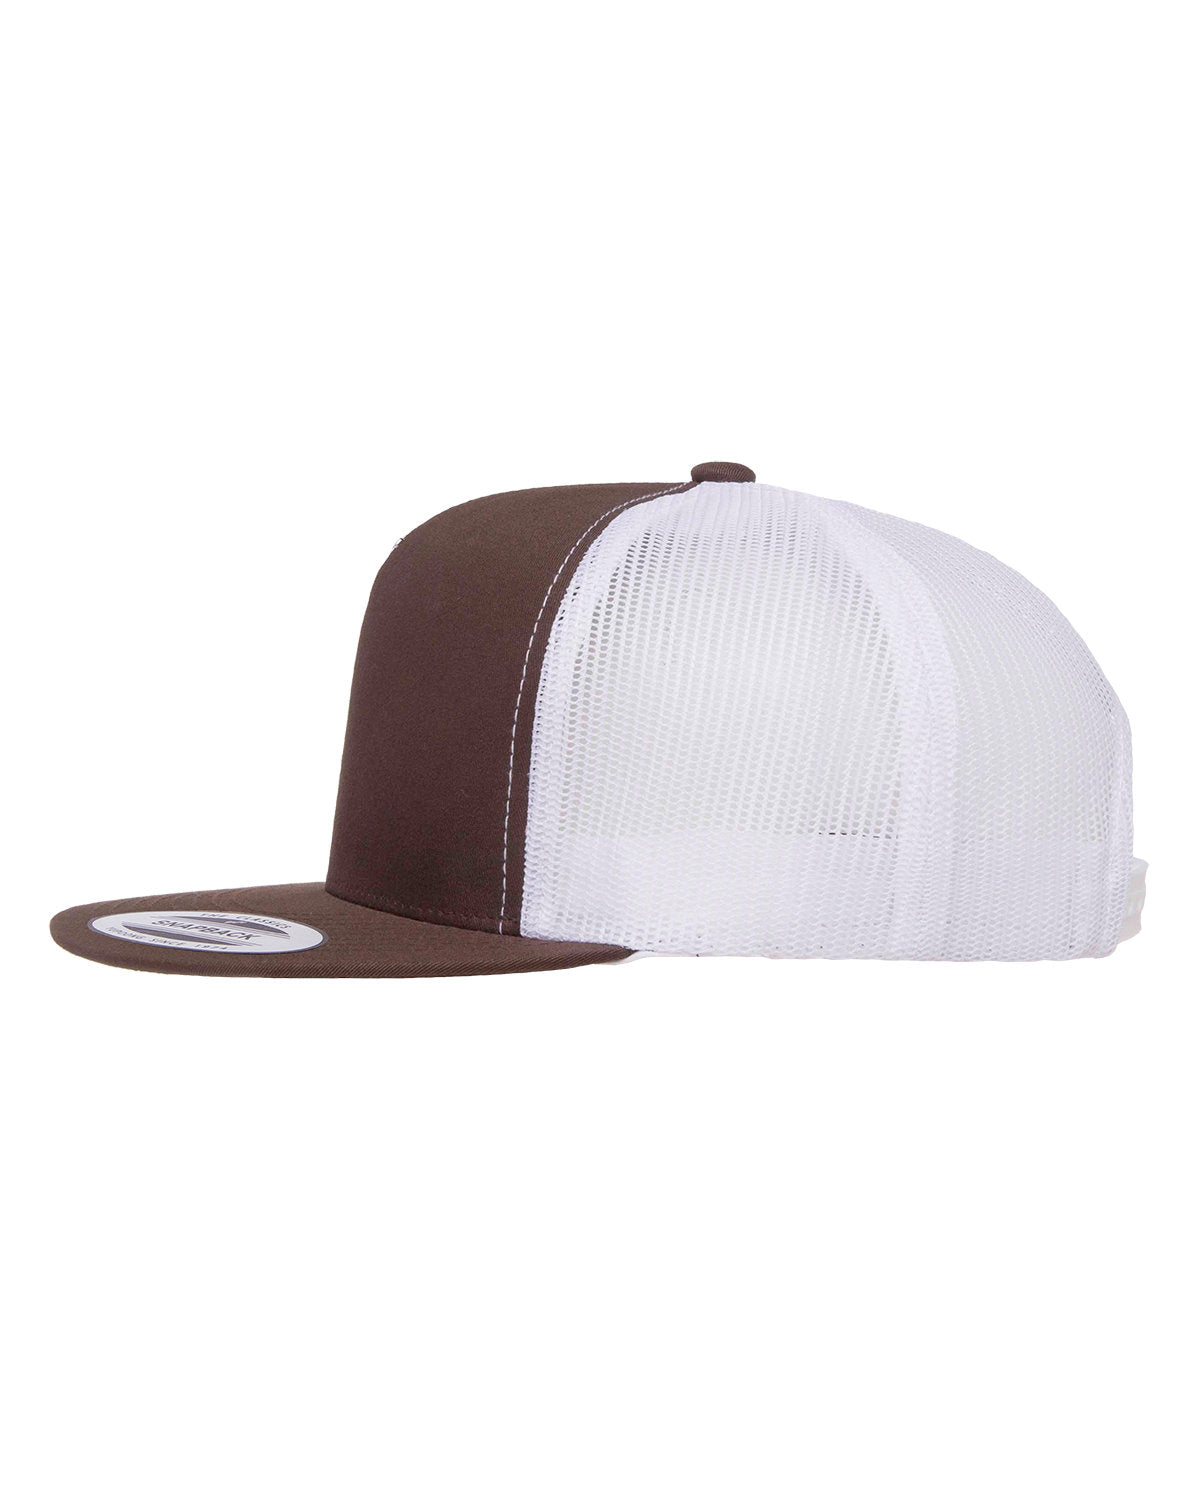 Yupoong 5 -Panel Classic Customized Trucker Caps, Brown/ White